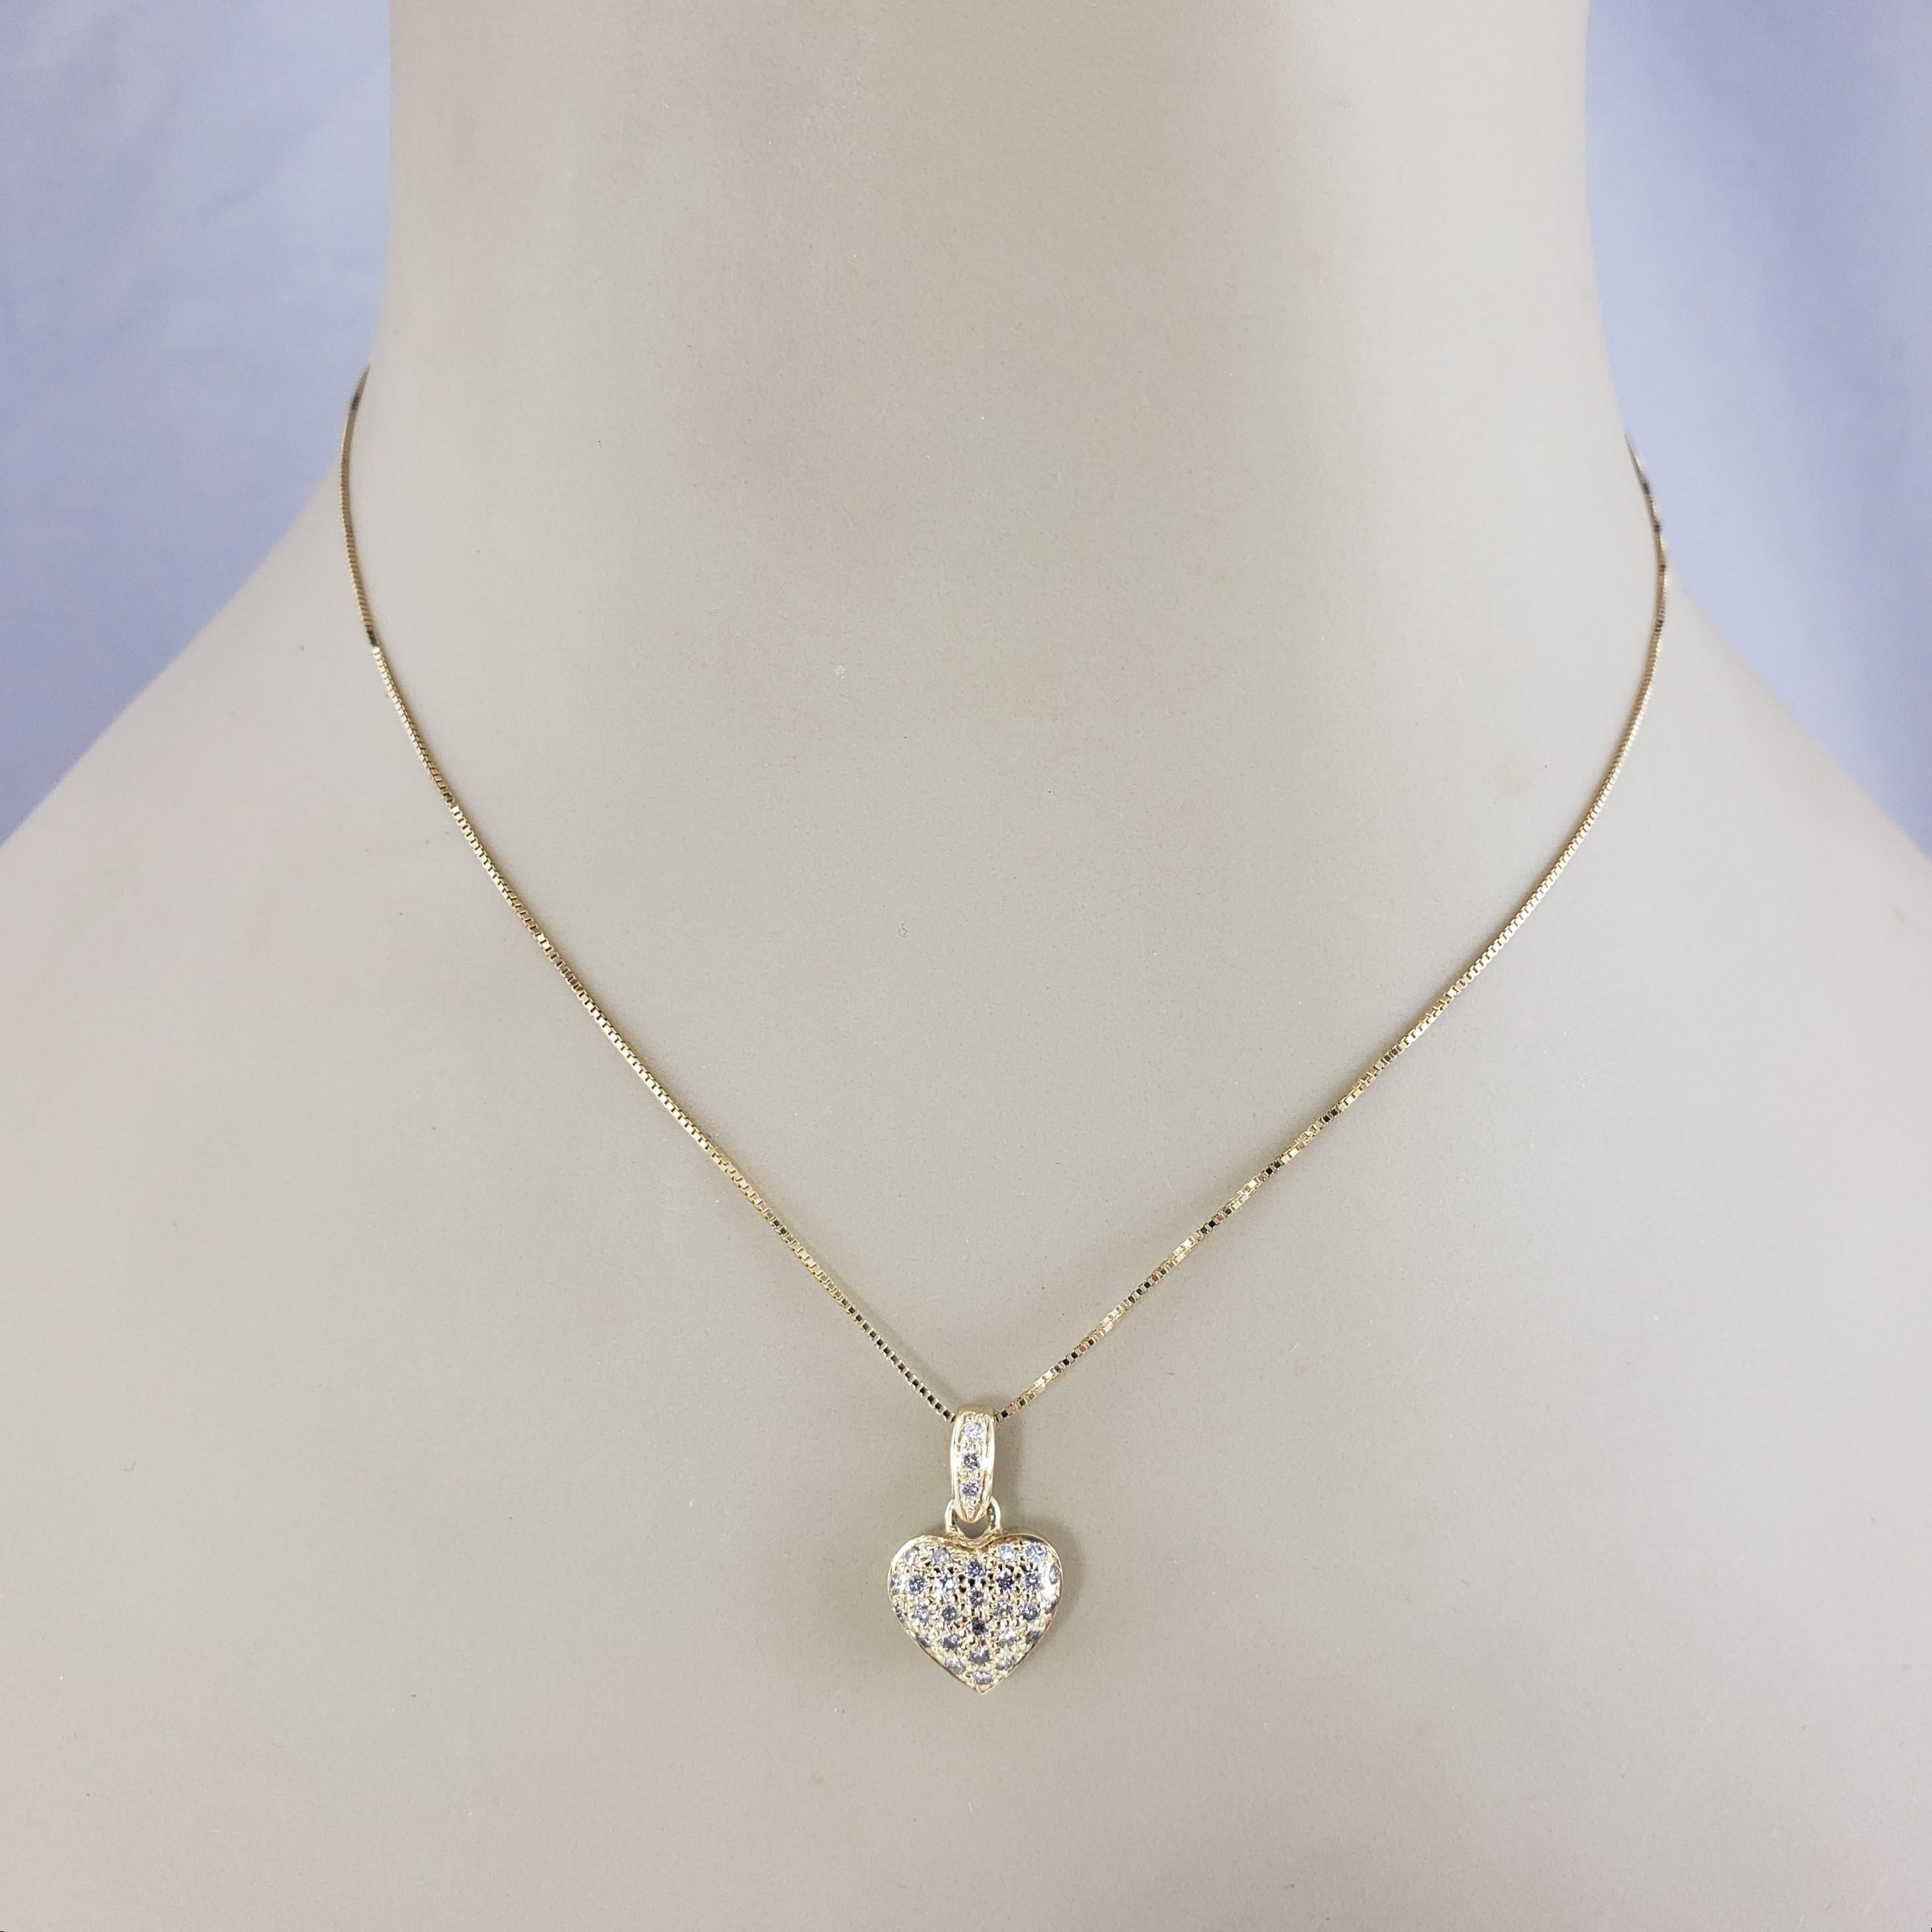 Vintage 14 Karat Yellow Gold and Diamond Heart Pendant Necklace #15300 For Sale 3